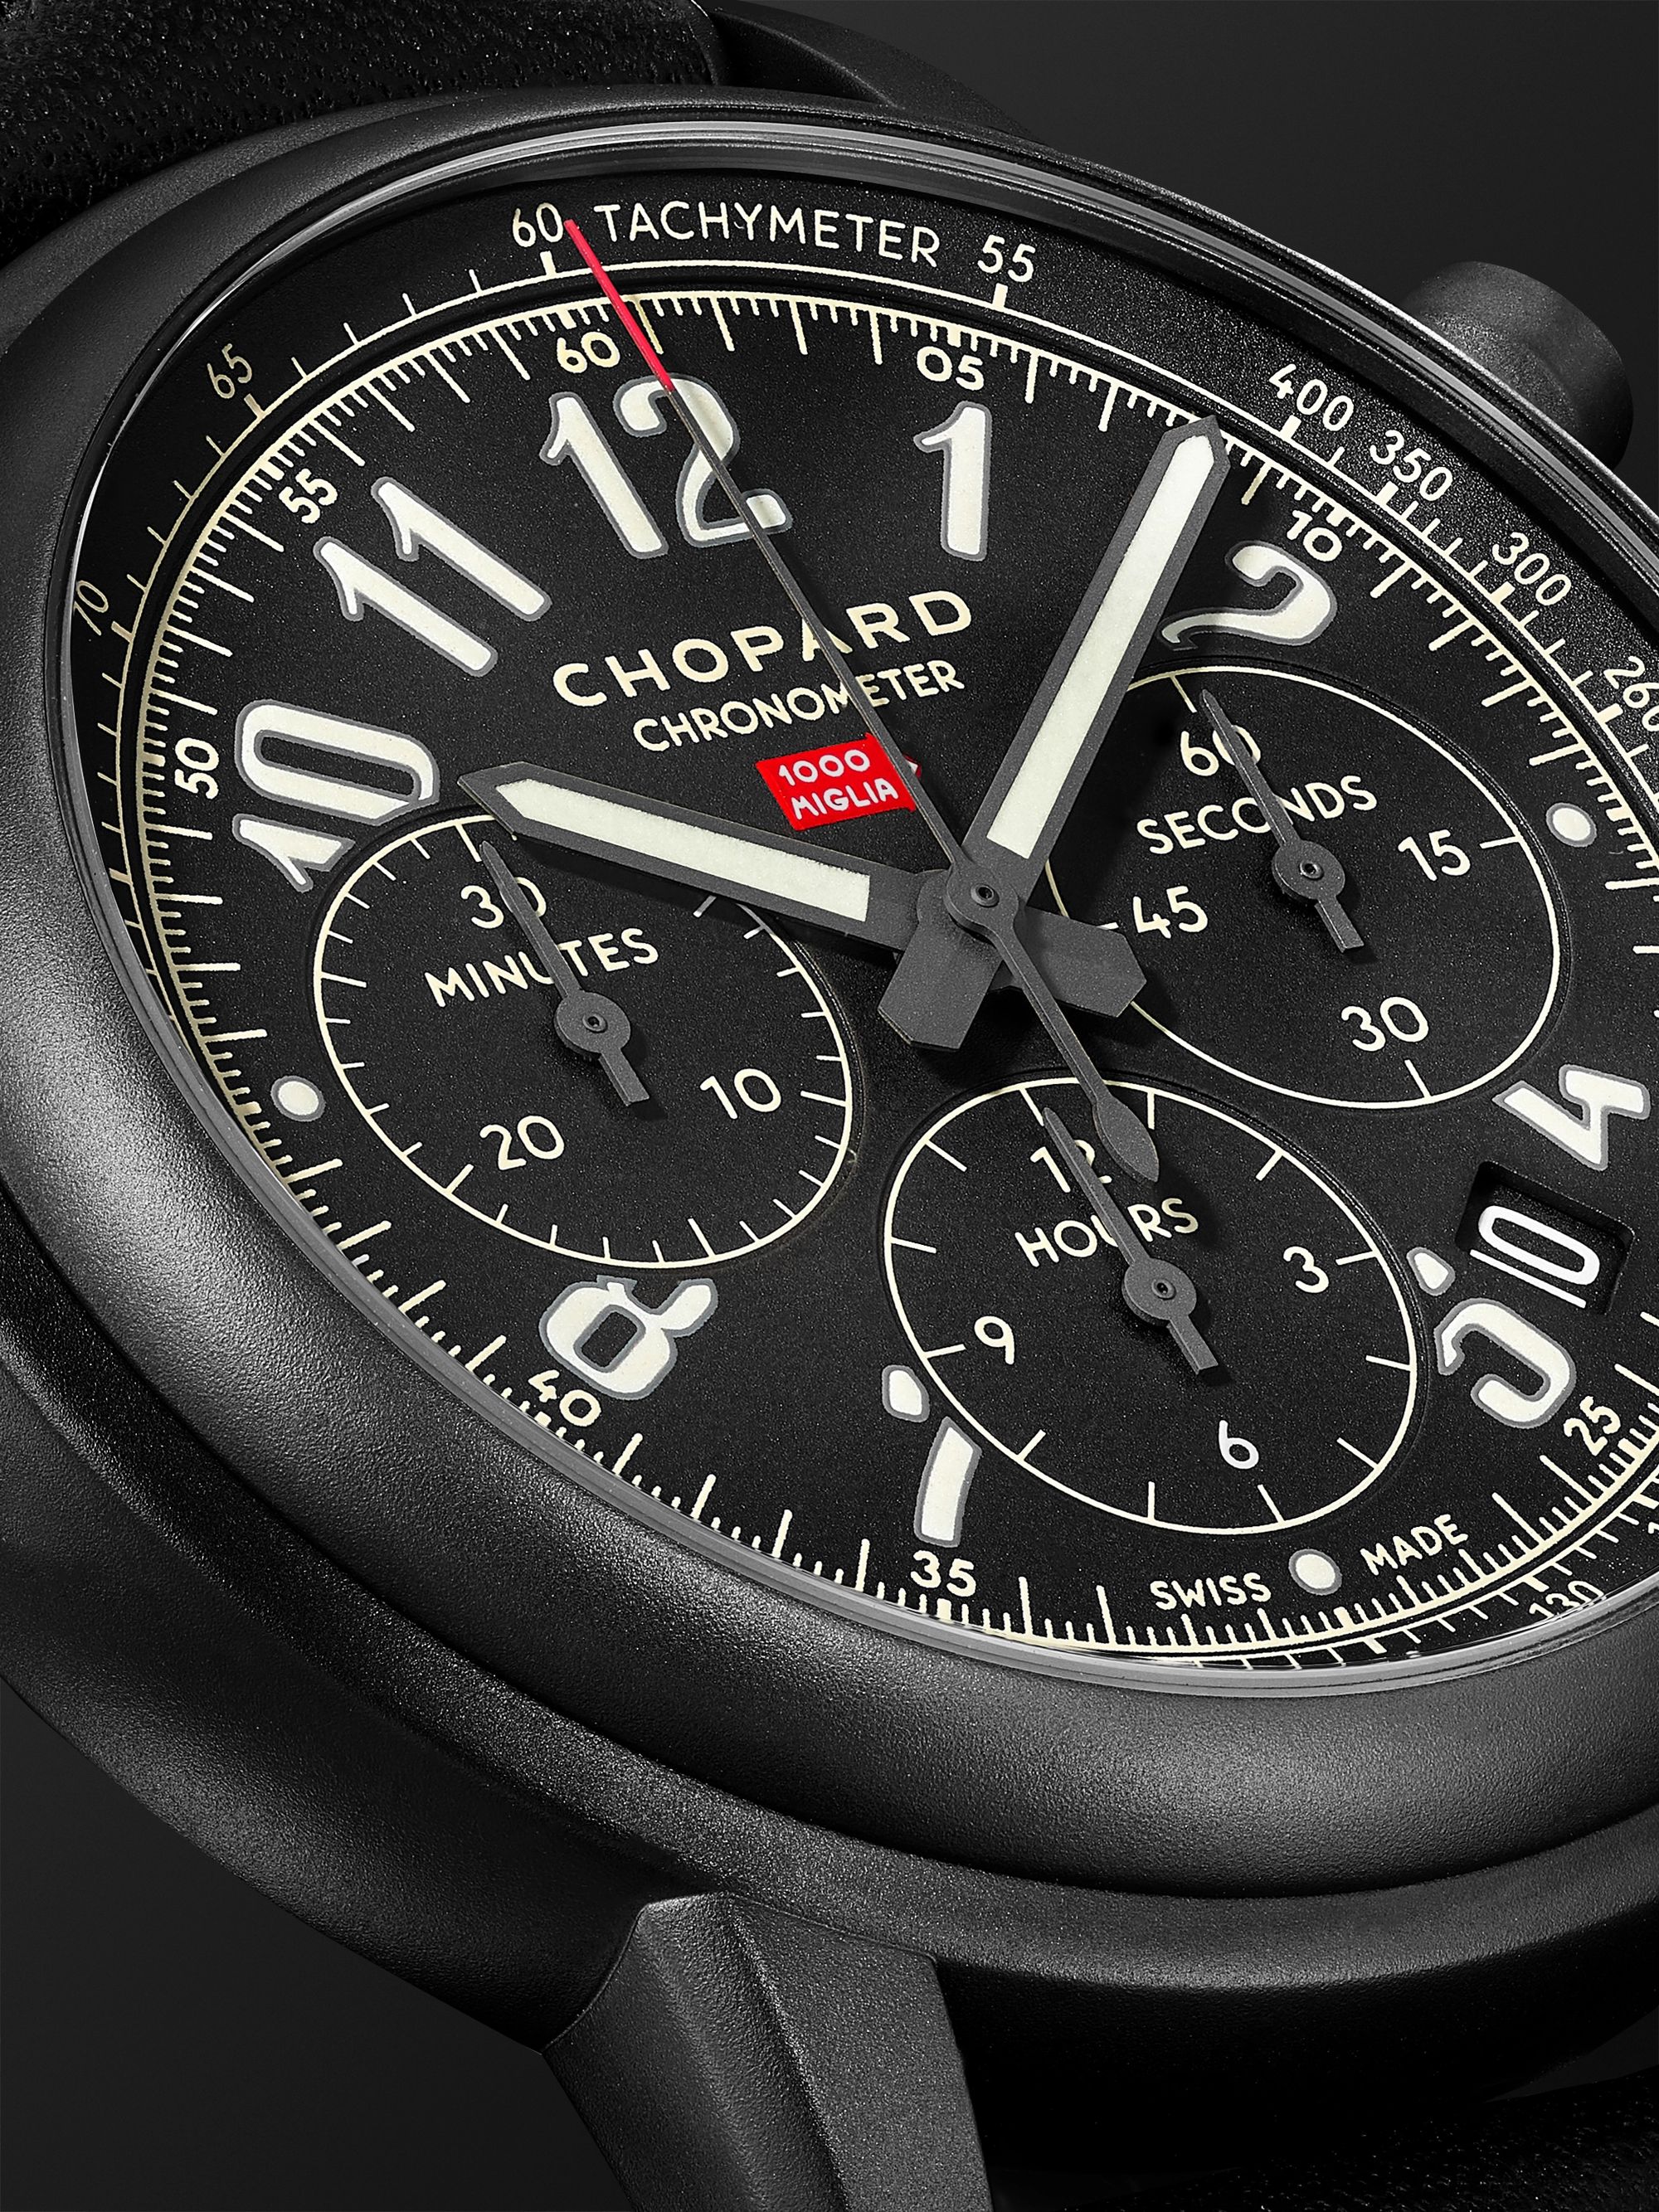 CHOPARD Mille Miglia 2020 Race Edition Limited Edition Automatic Chronograph 42mm Stainless Steel and Leather Watch, Ref. No. 168589-3028